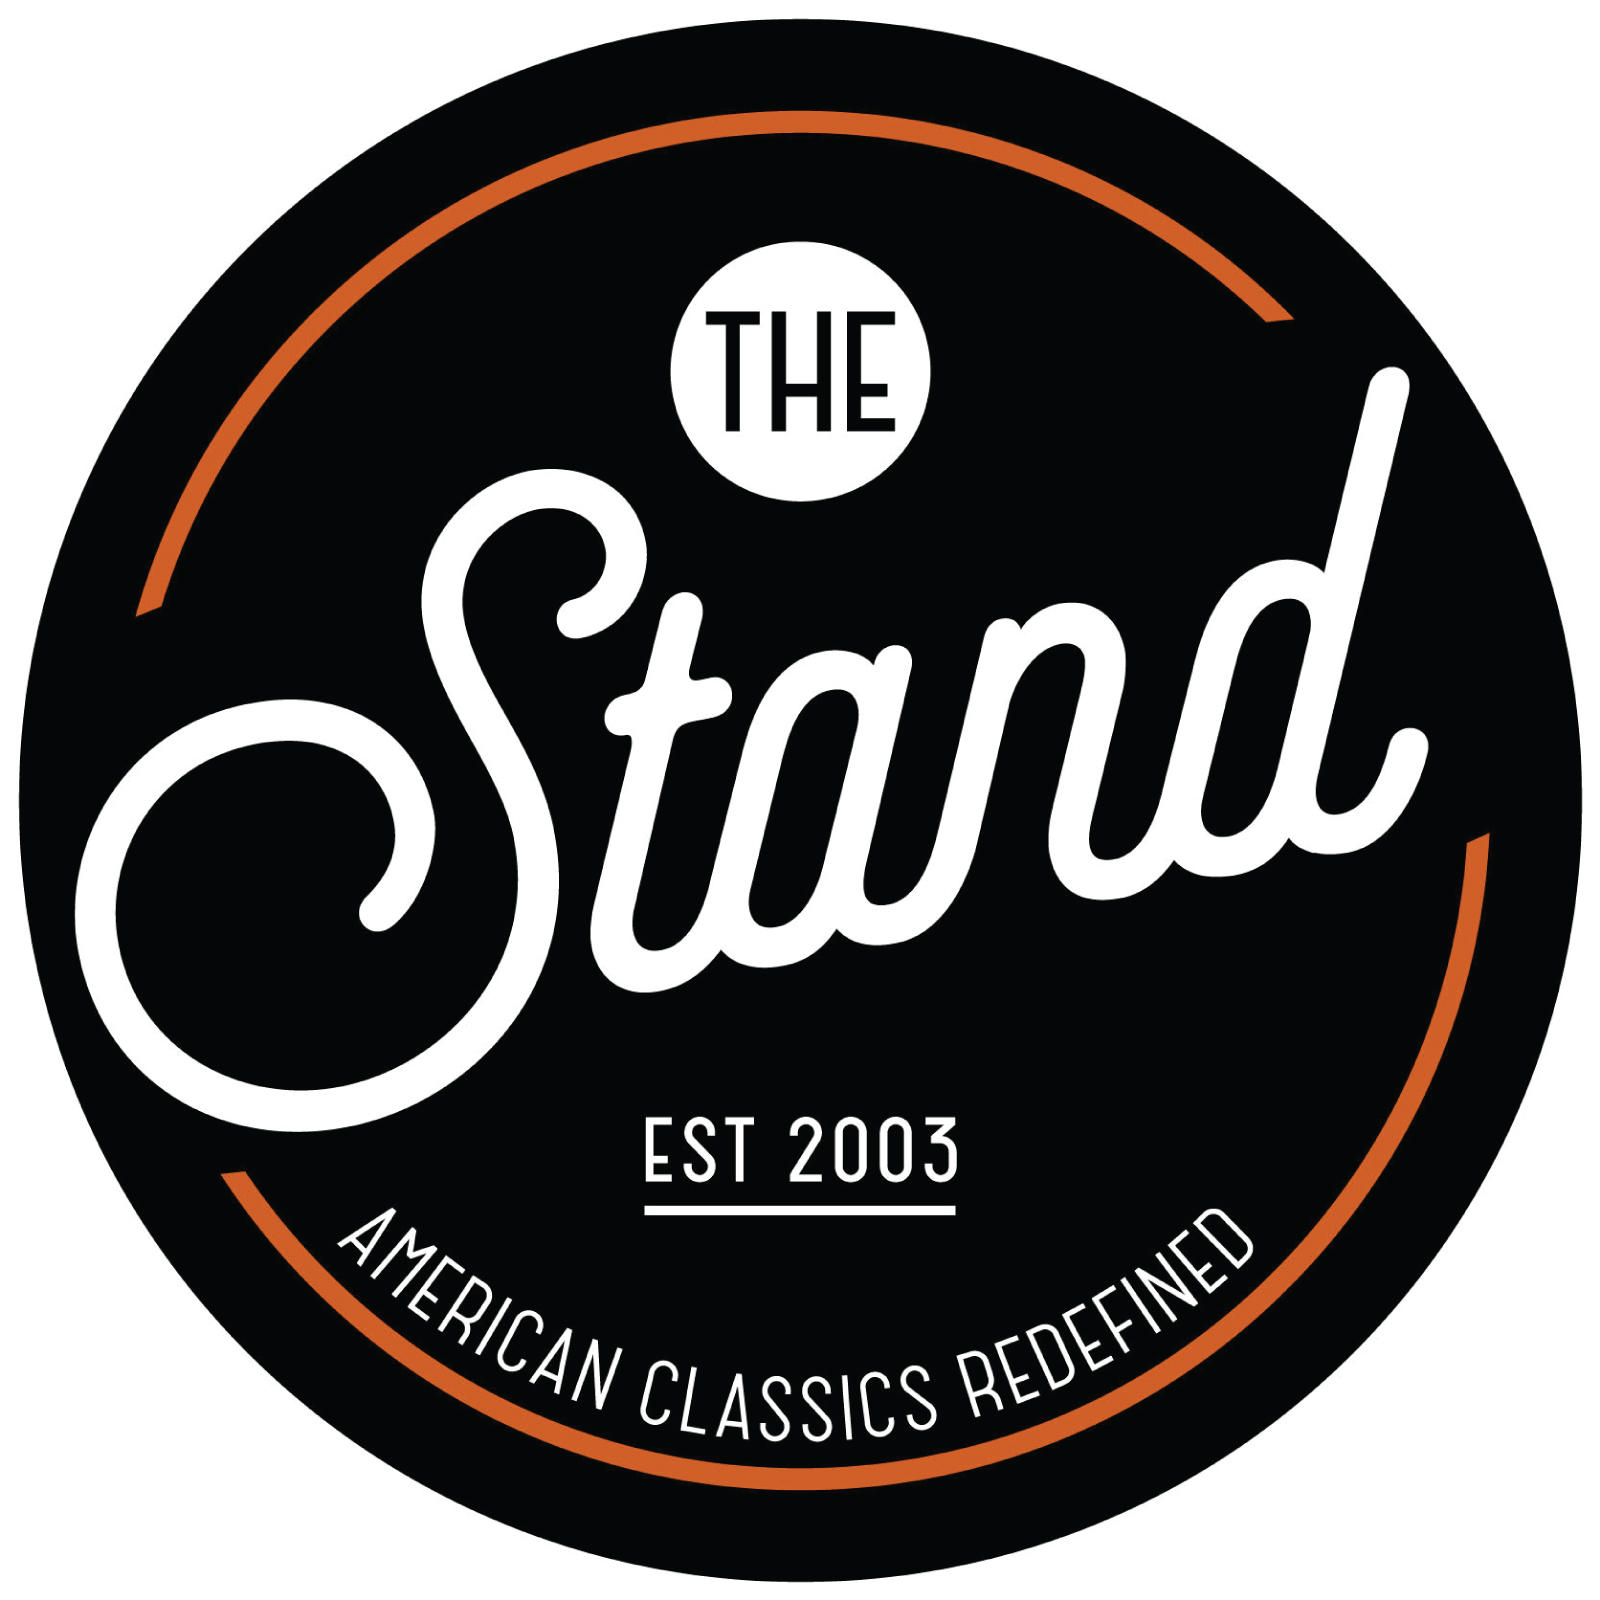 The Stand "American Classics Redefined"